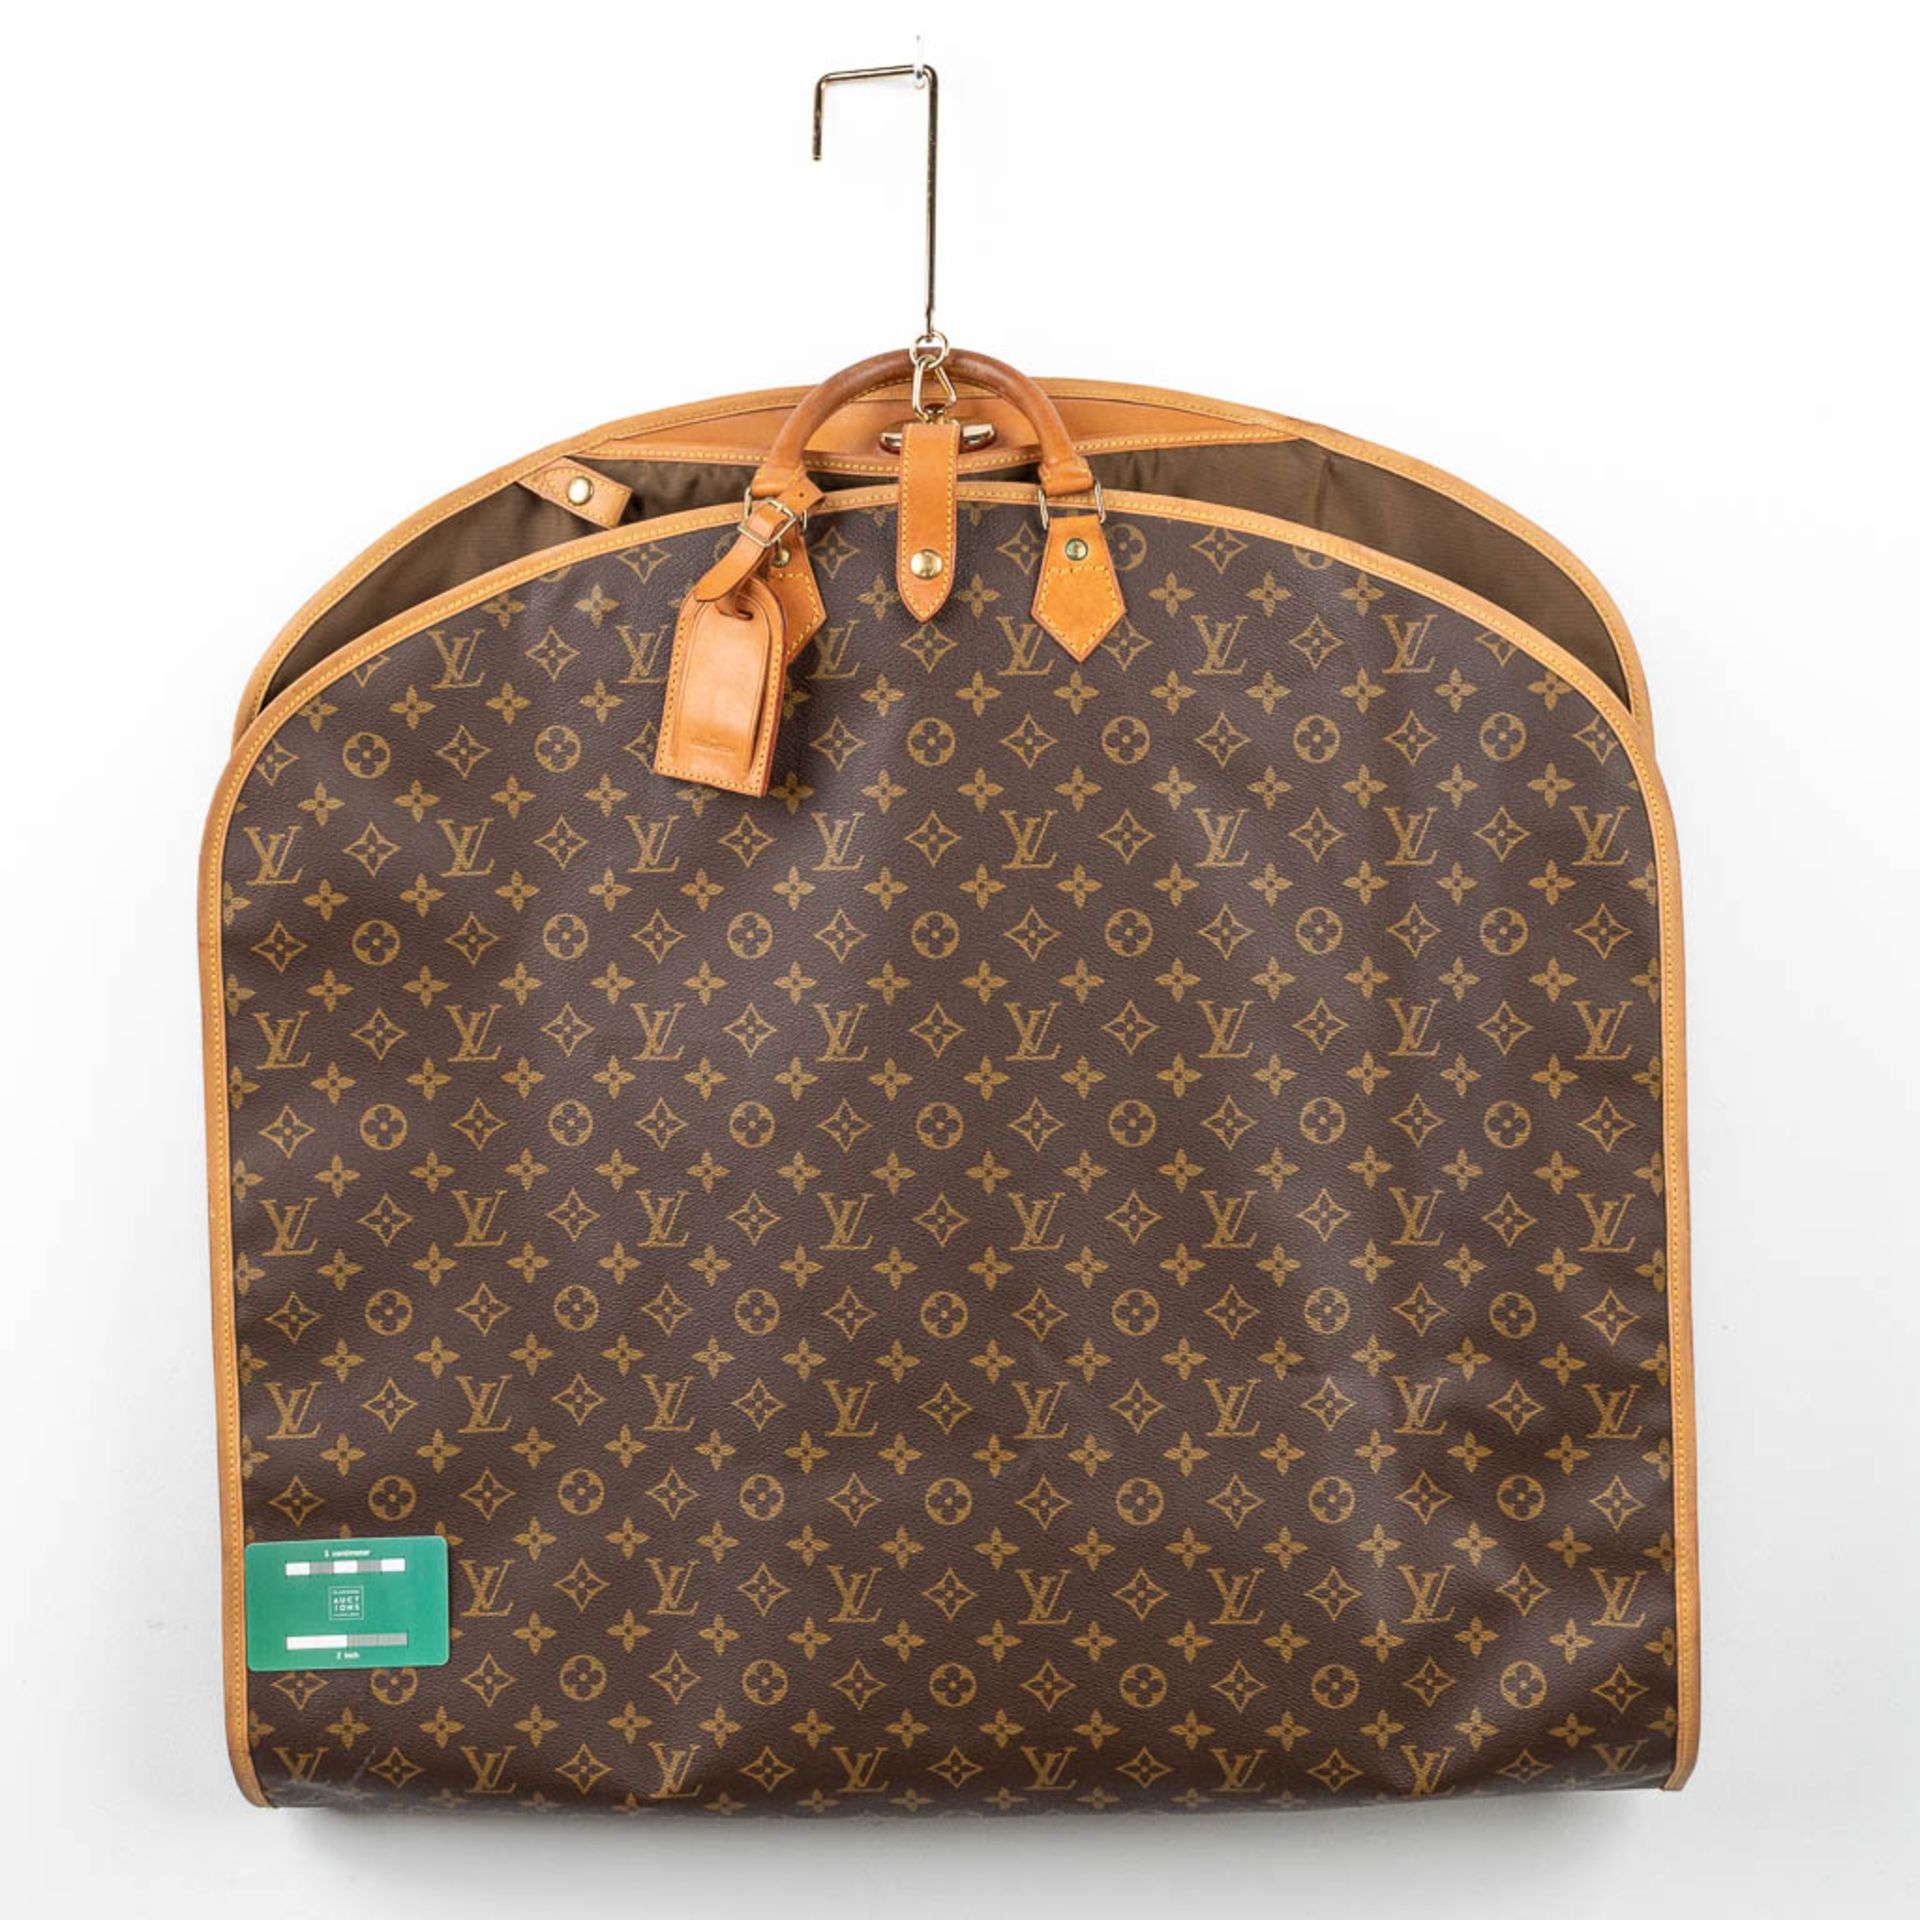 A garment suit traveller's bag made of leather by Louis Vuitton. (H:70cm) - Image 12 of 13